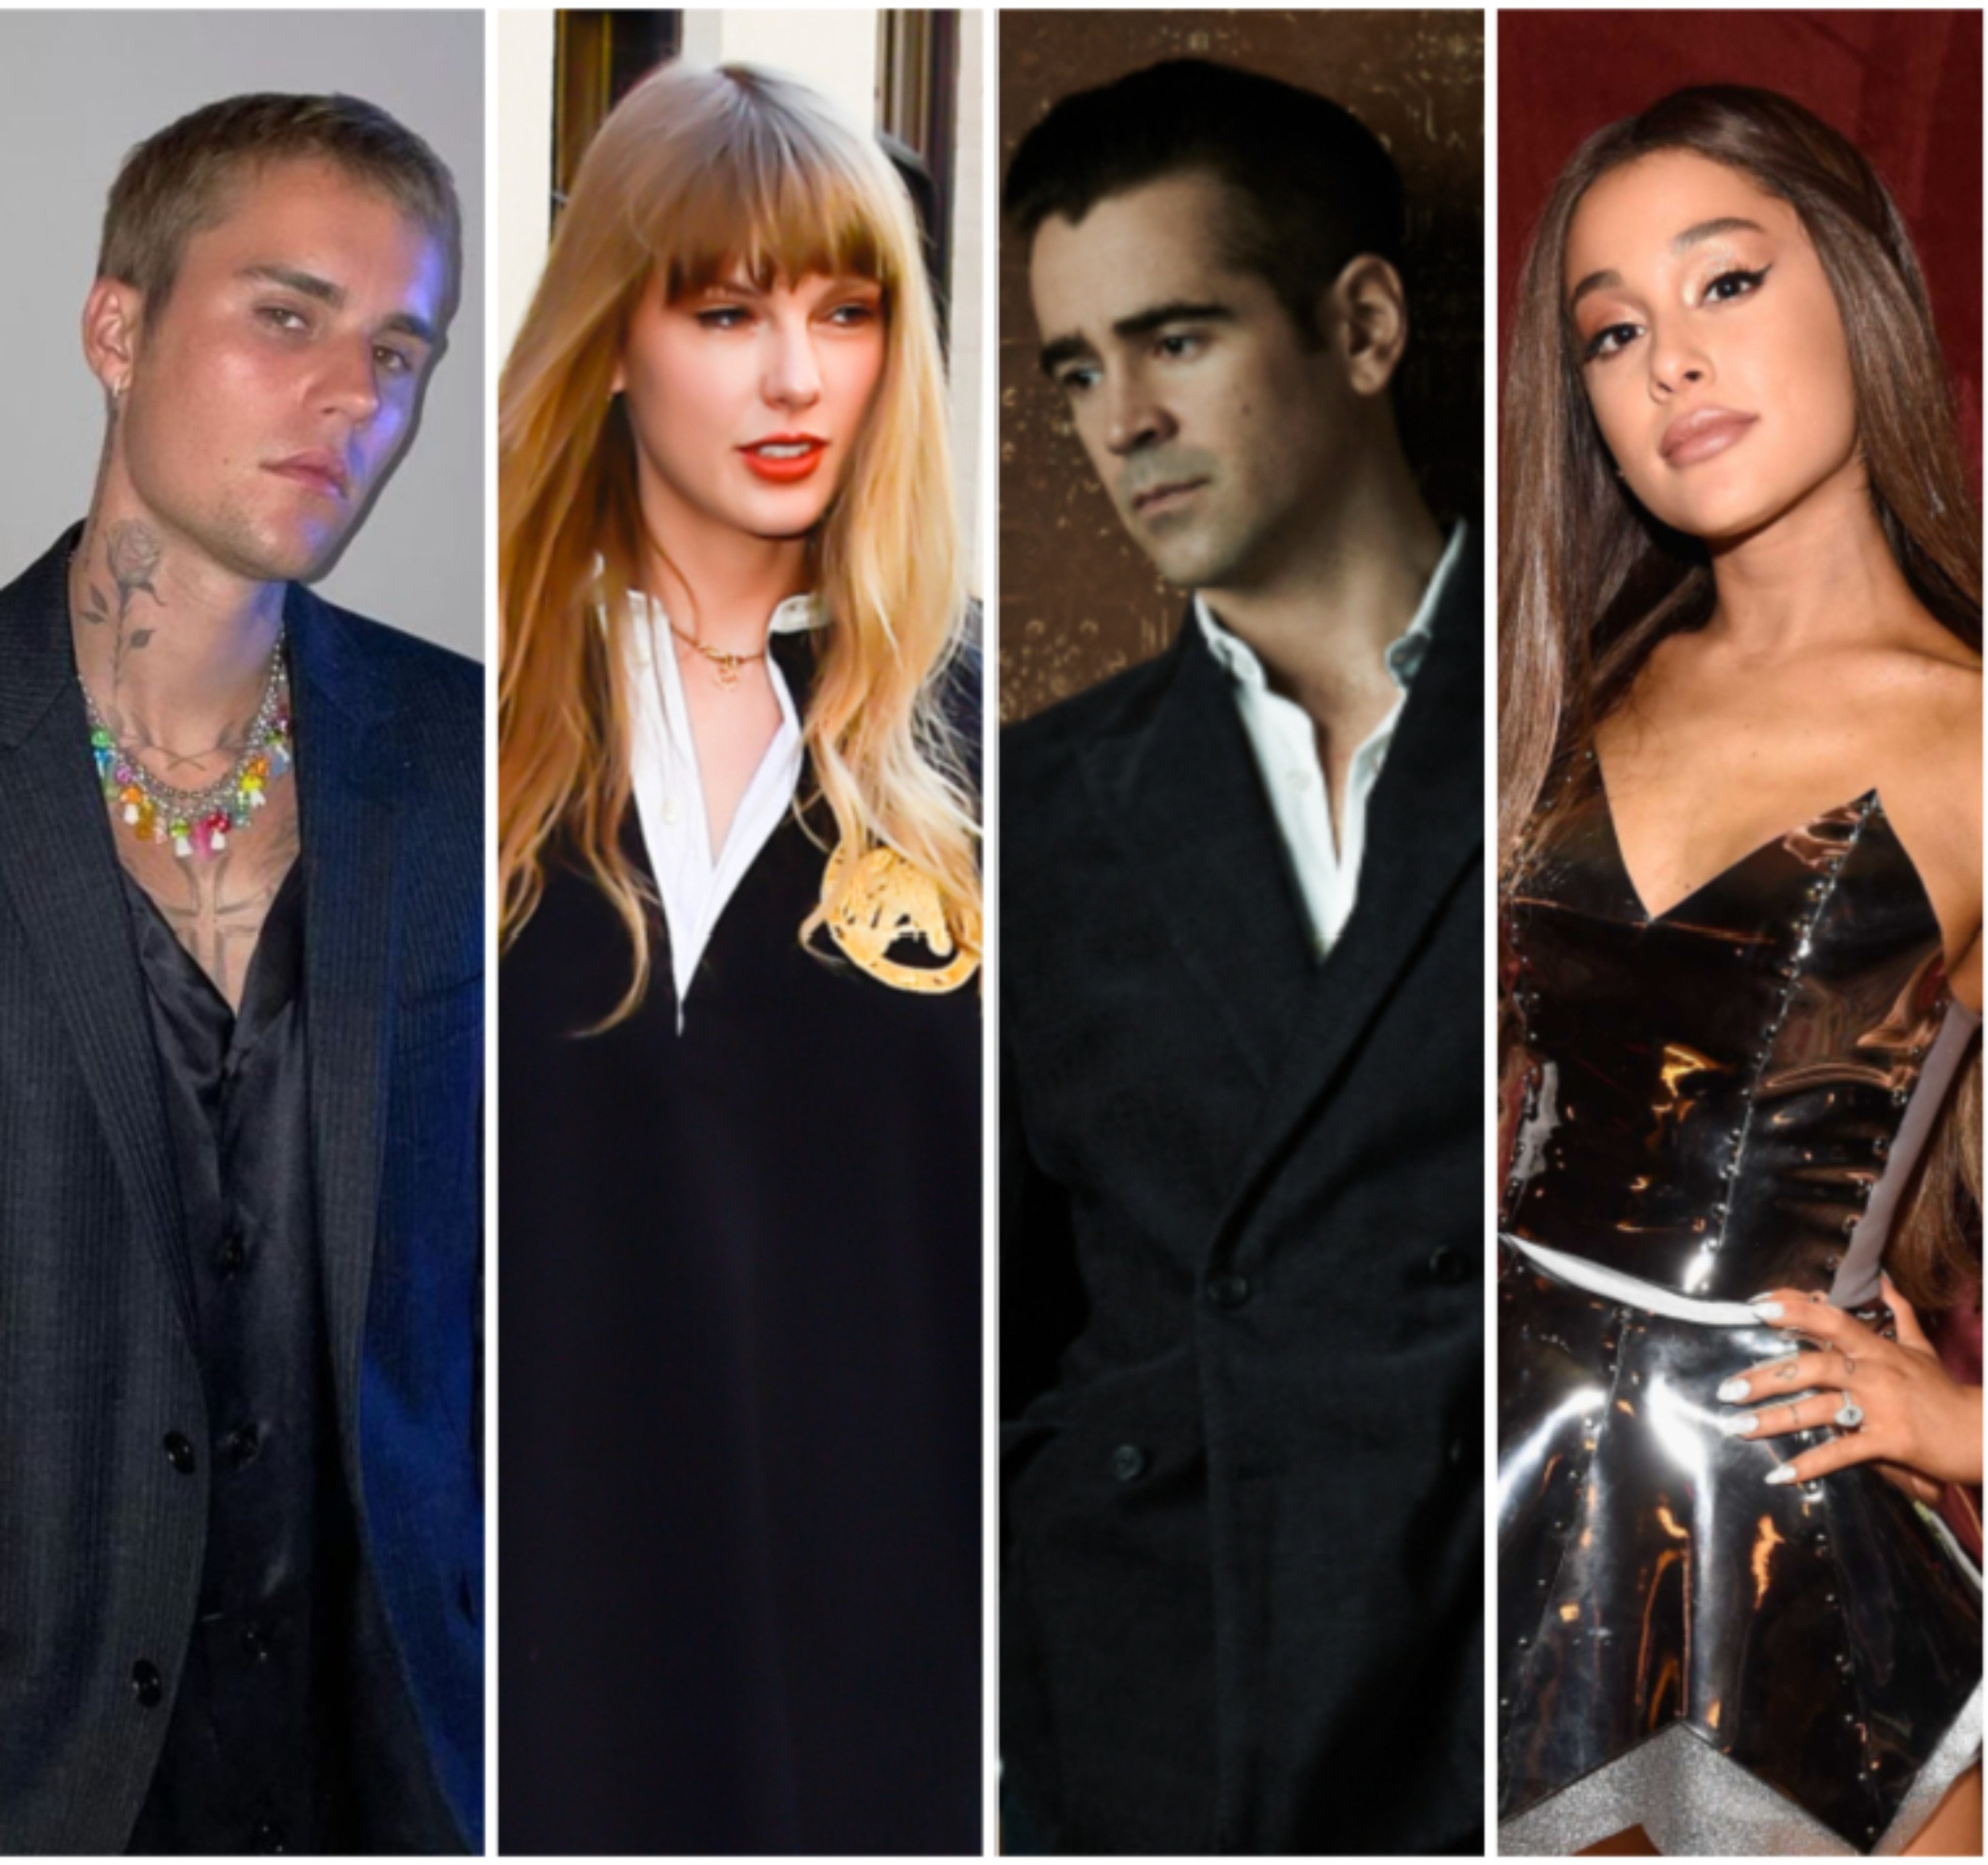 The downside of fame: Justin Bieber, Taylor Swift, Colin Farrell and Ariana Grande have all suffered distress at the hands of stalkers. Photos: Getty Images; @justinbieber/Instagram; GC Images; Brian Bowen Smith; WireImage